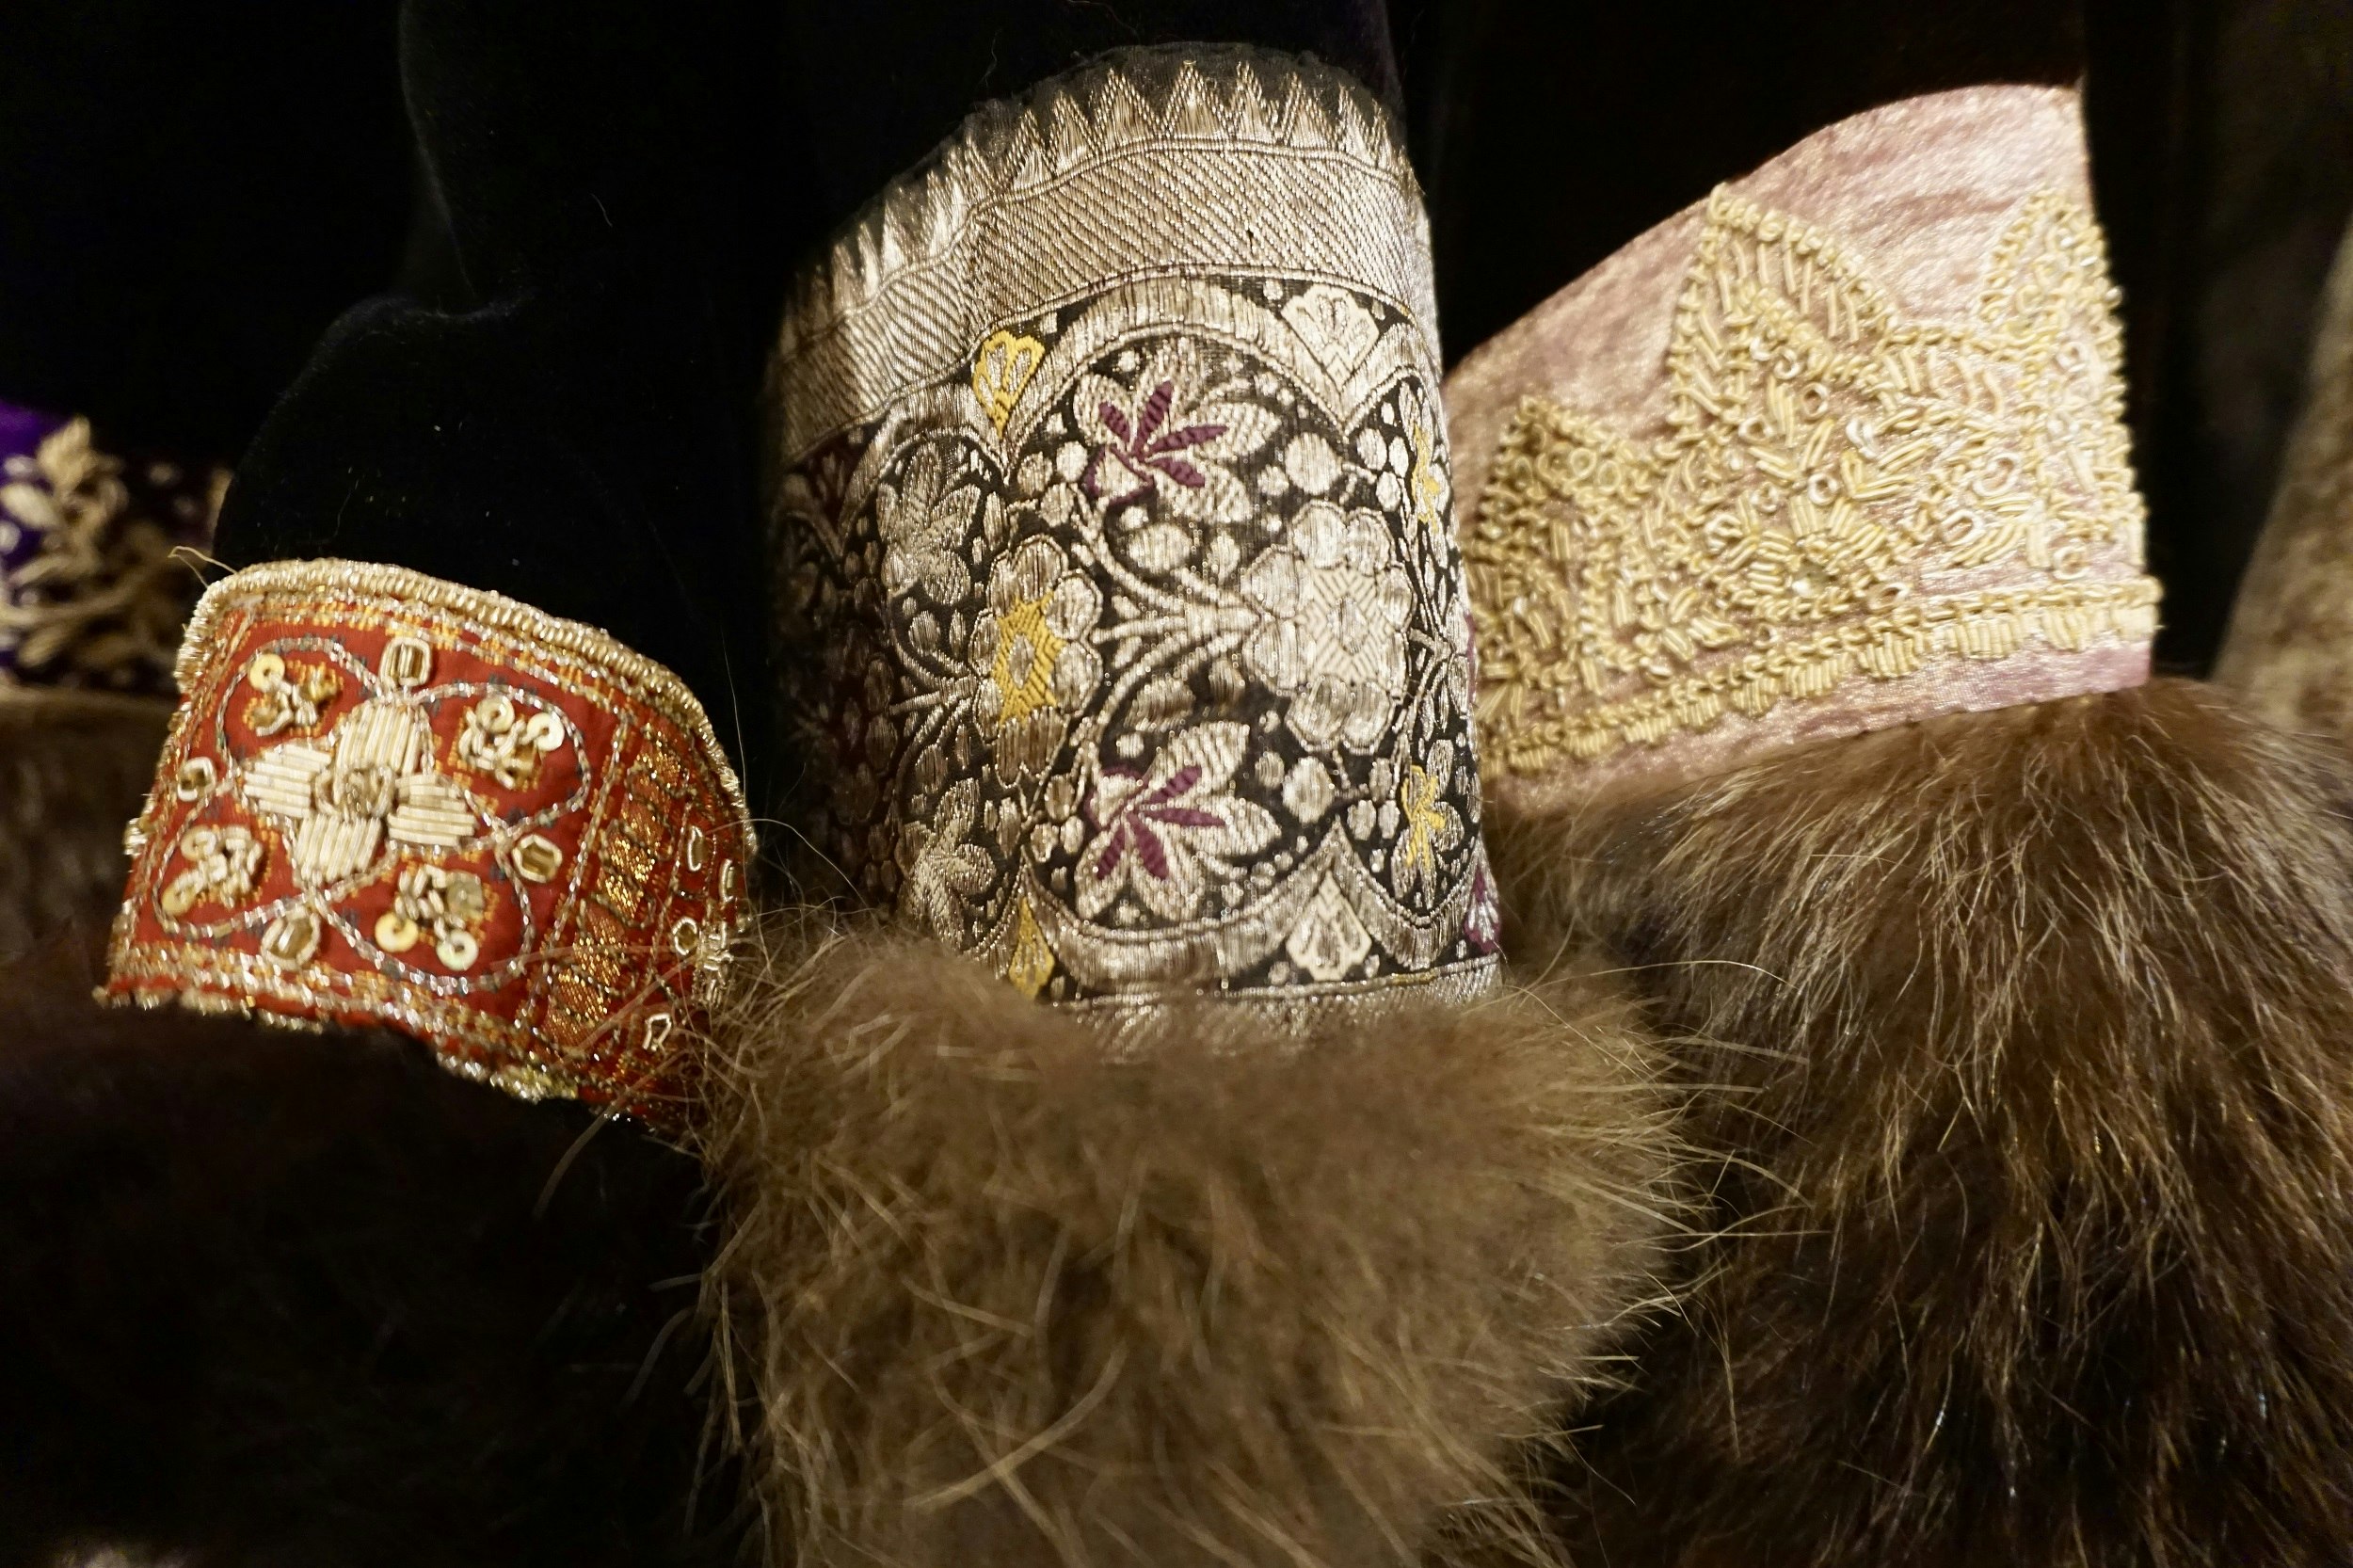 Embroidered bracelets of reds, browns and yellows, some with fur trim.